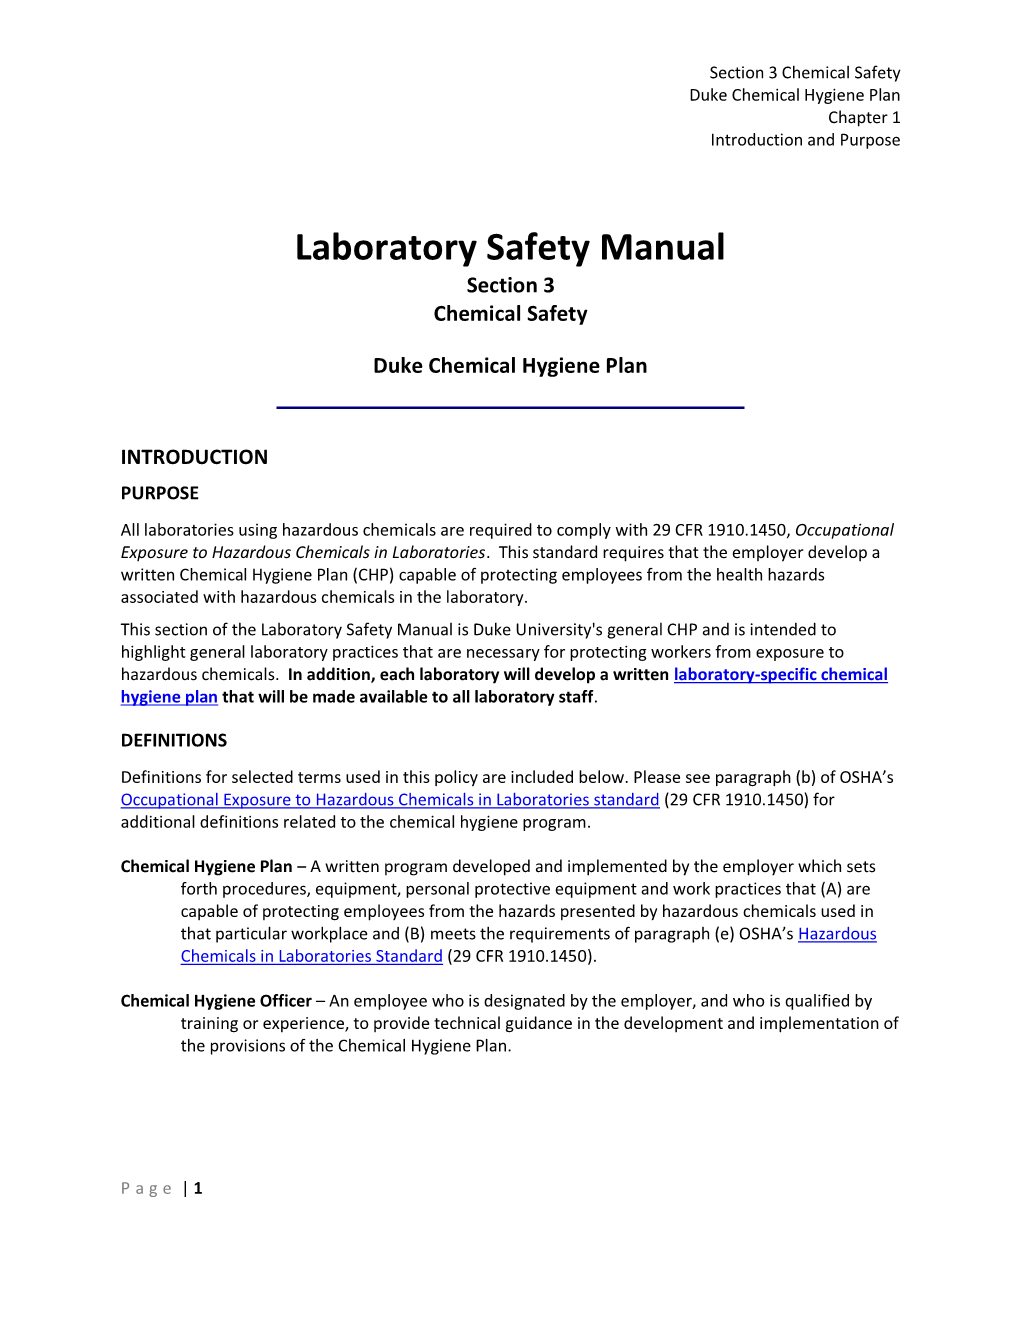 Chemical Hygiene/Safety Section of the Lab Safety Manual